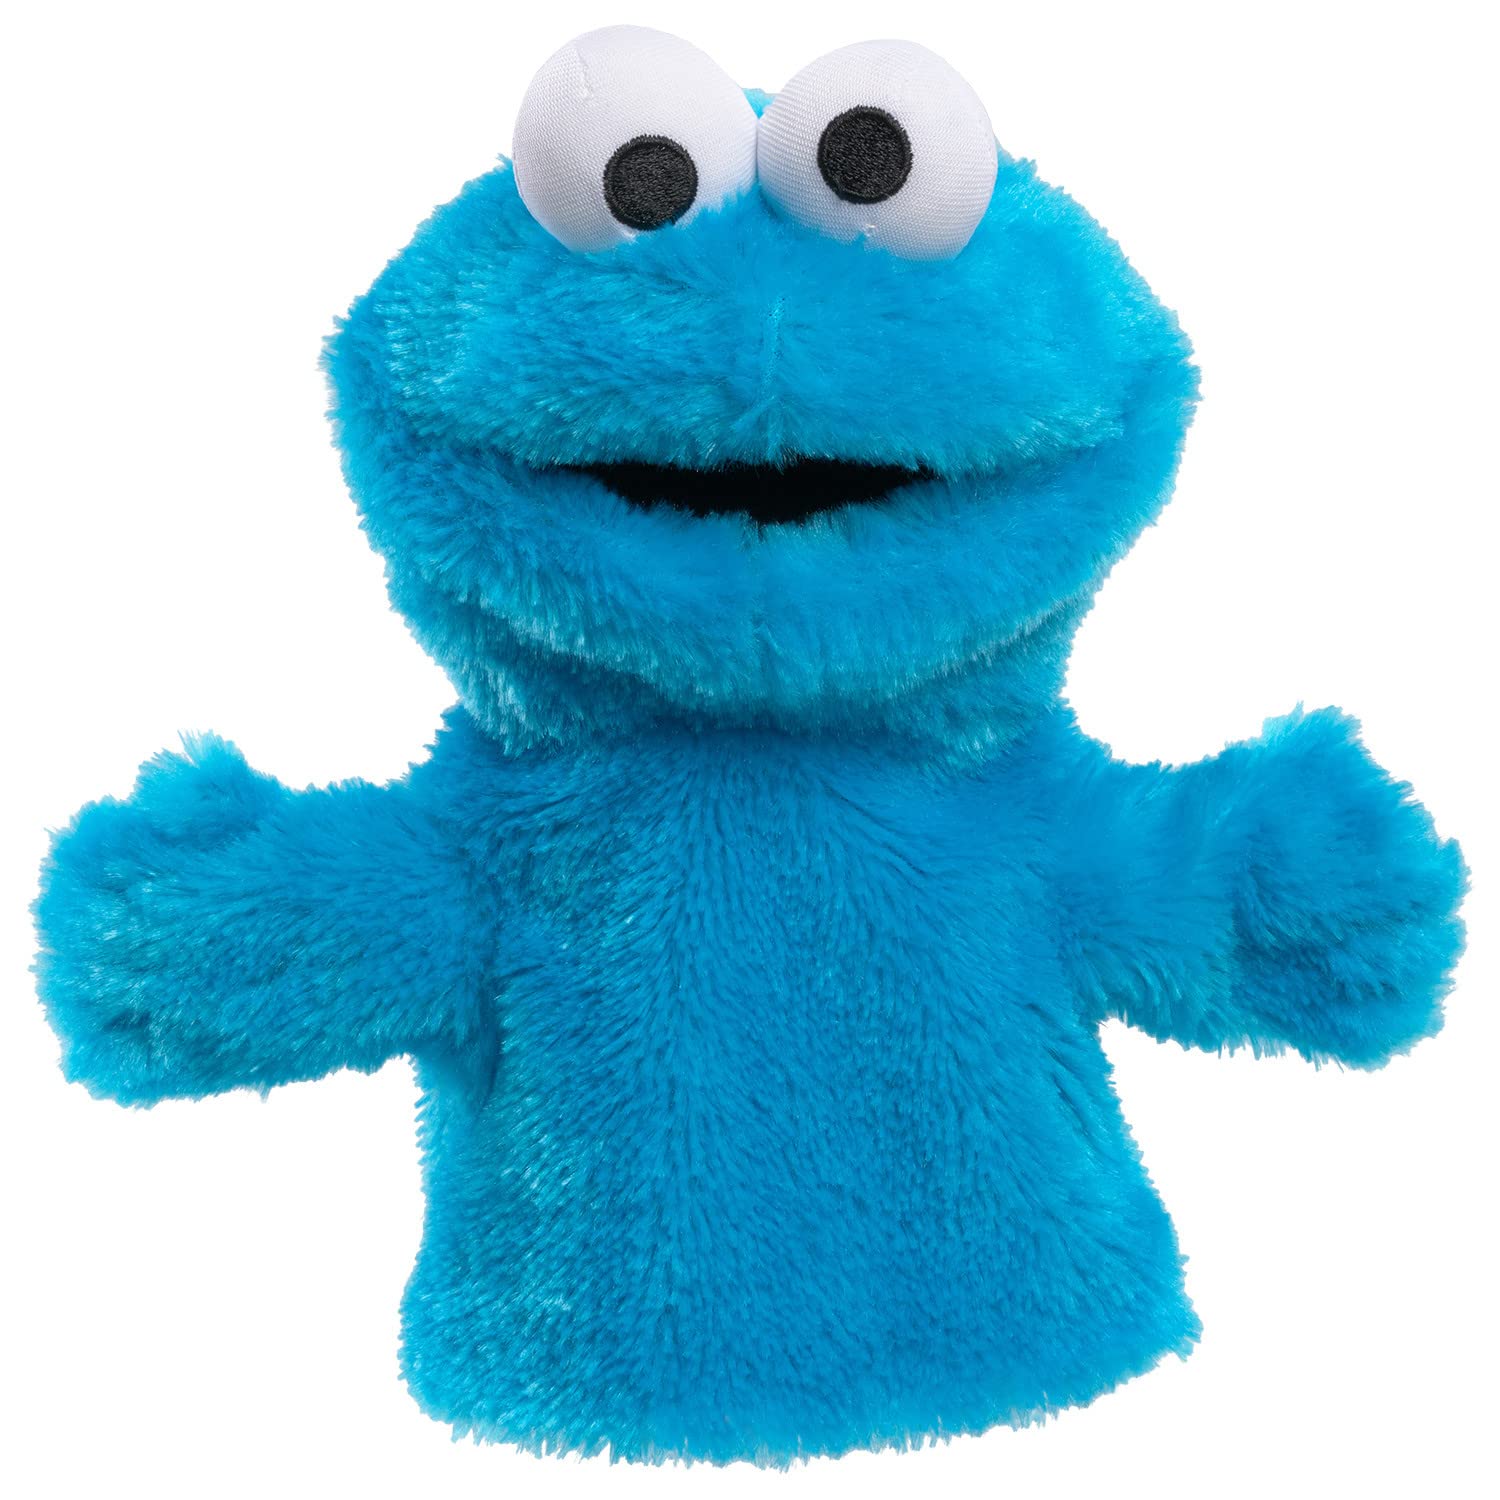 Sesame Street Cookie Monster 9-inch Hand Puppet, Preschool Pretend Play, Officially Licensed Kids Toys for Ages 18 Month by Just Play